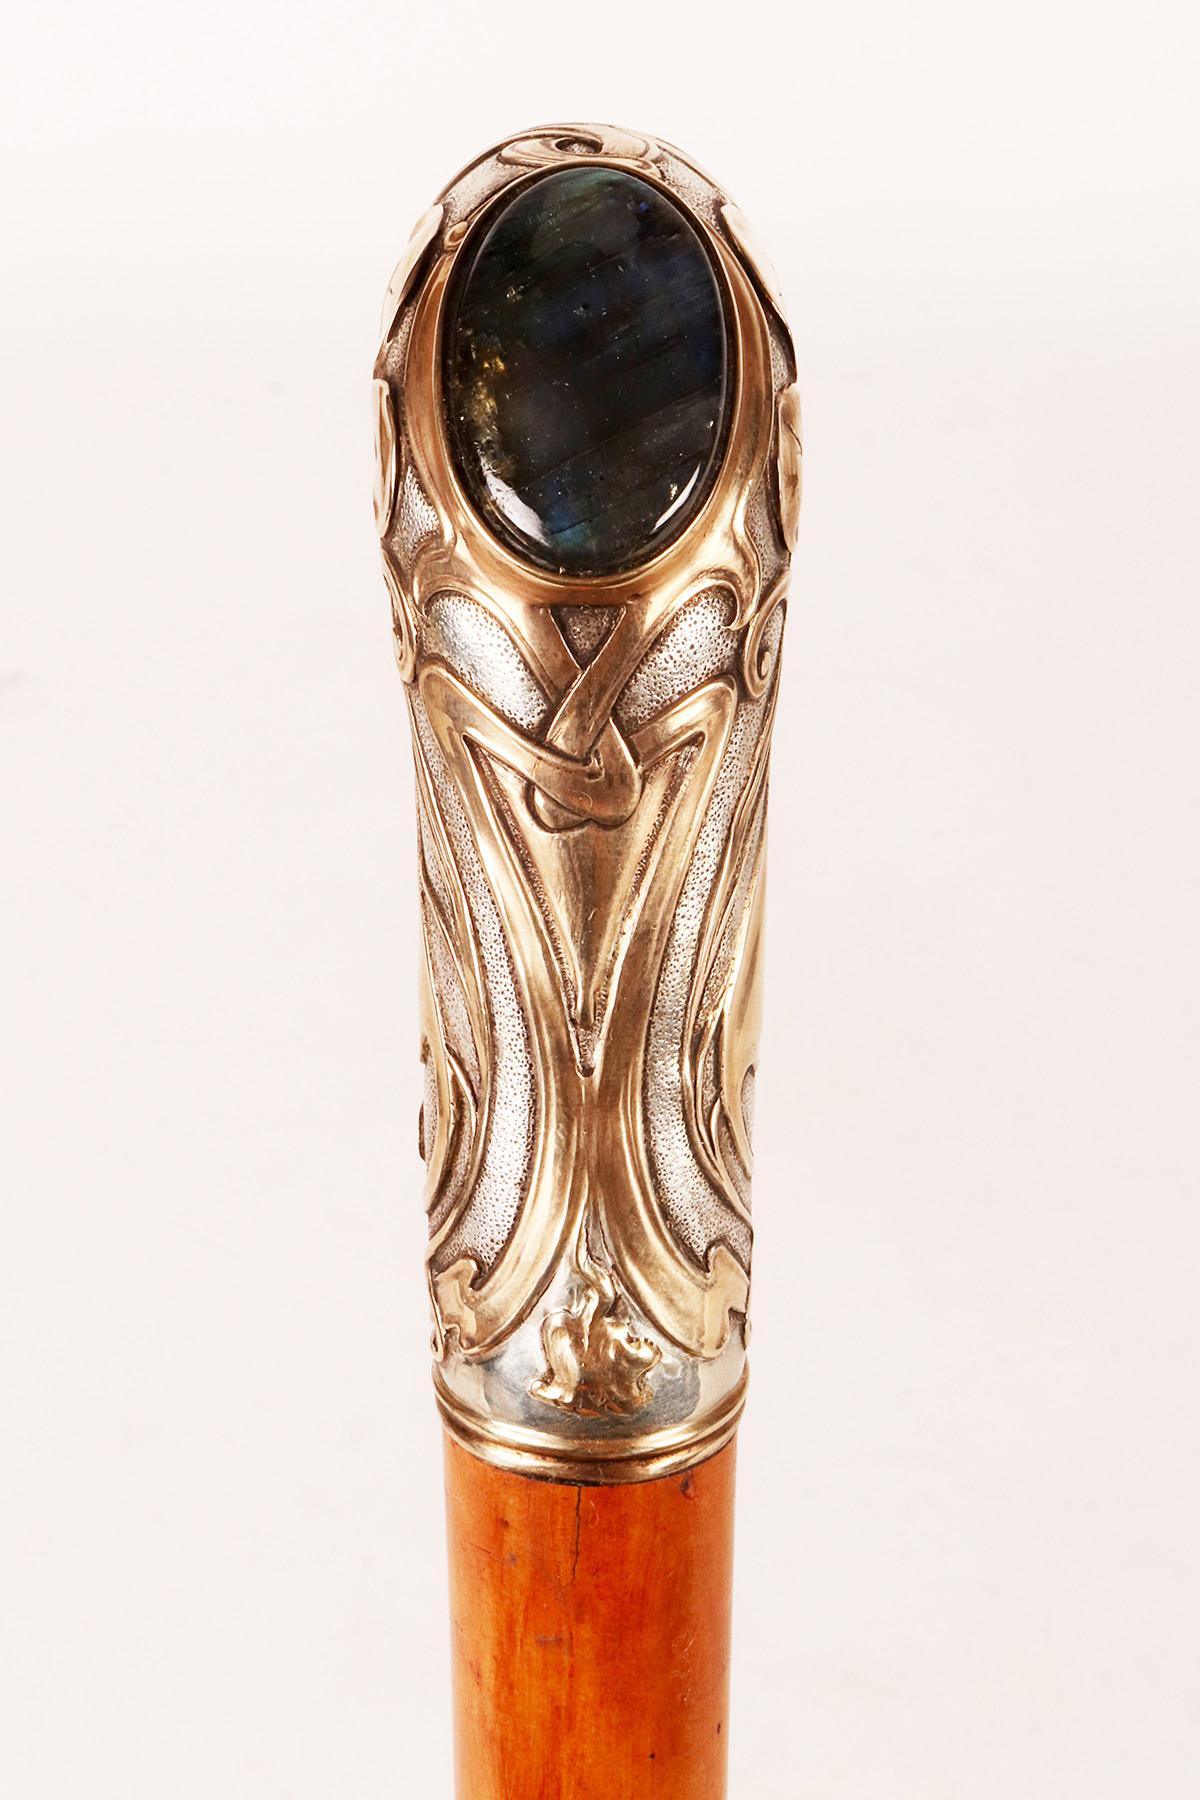 Art Nouveau walking stick: L-shaped knob, made of 800/1000 silver metal, engraved and low-relief workmanship with Liberty and vegetal motifs, partially gilded. Central stone, a cabochon cut labradorite. Rattan wood cane. Brass and iron ferrule.